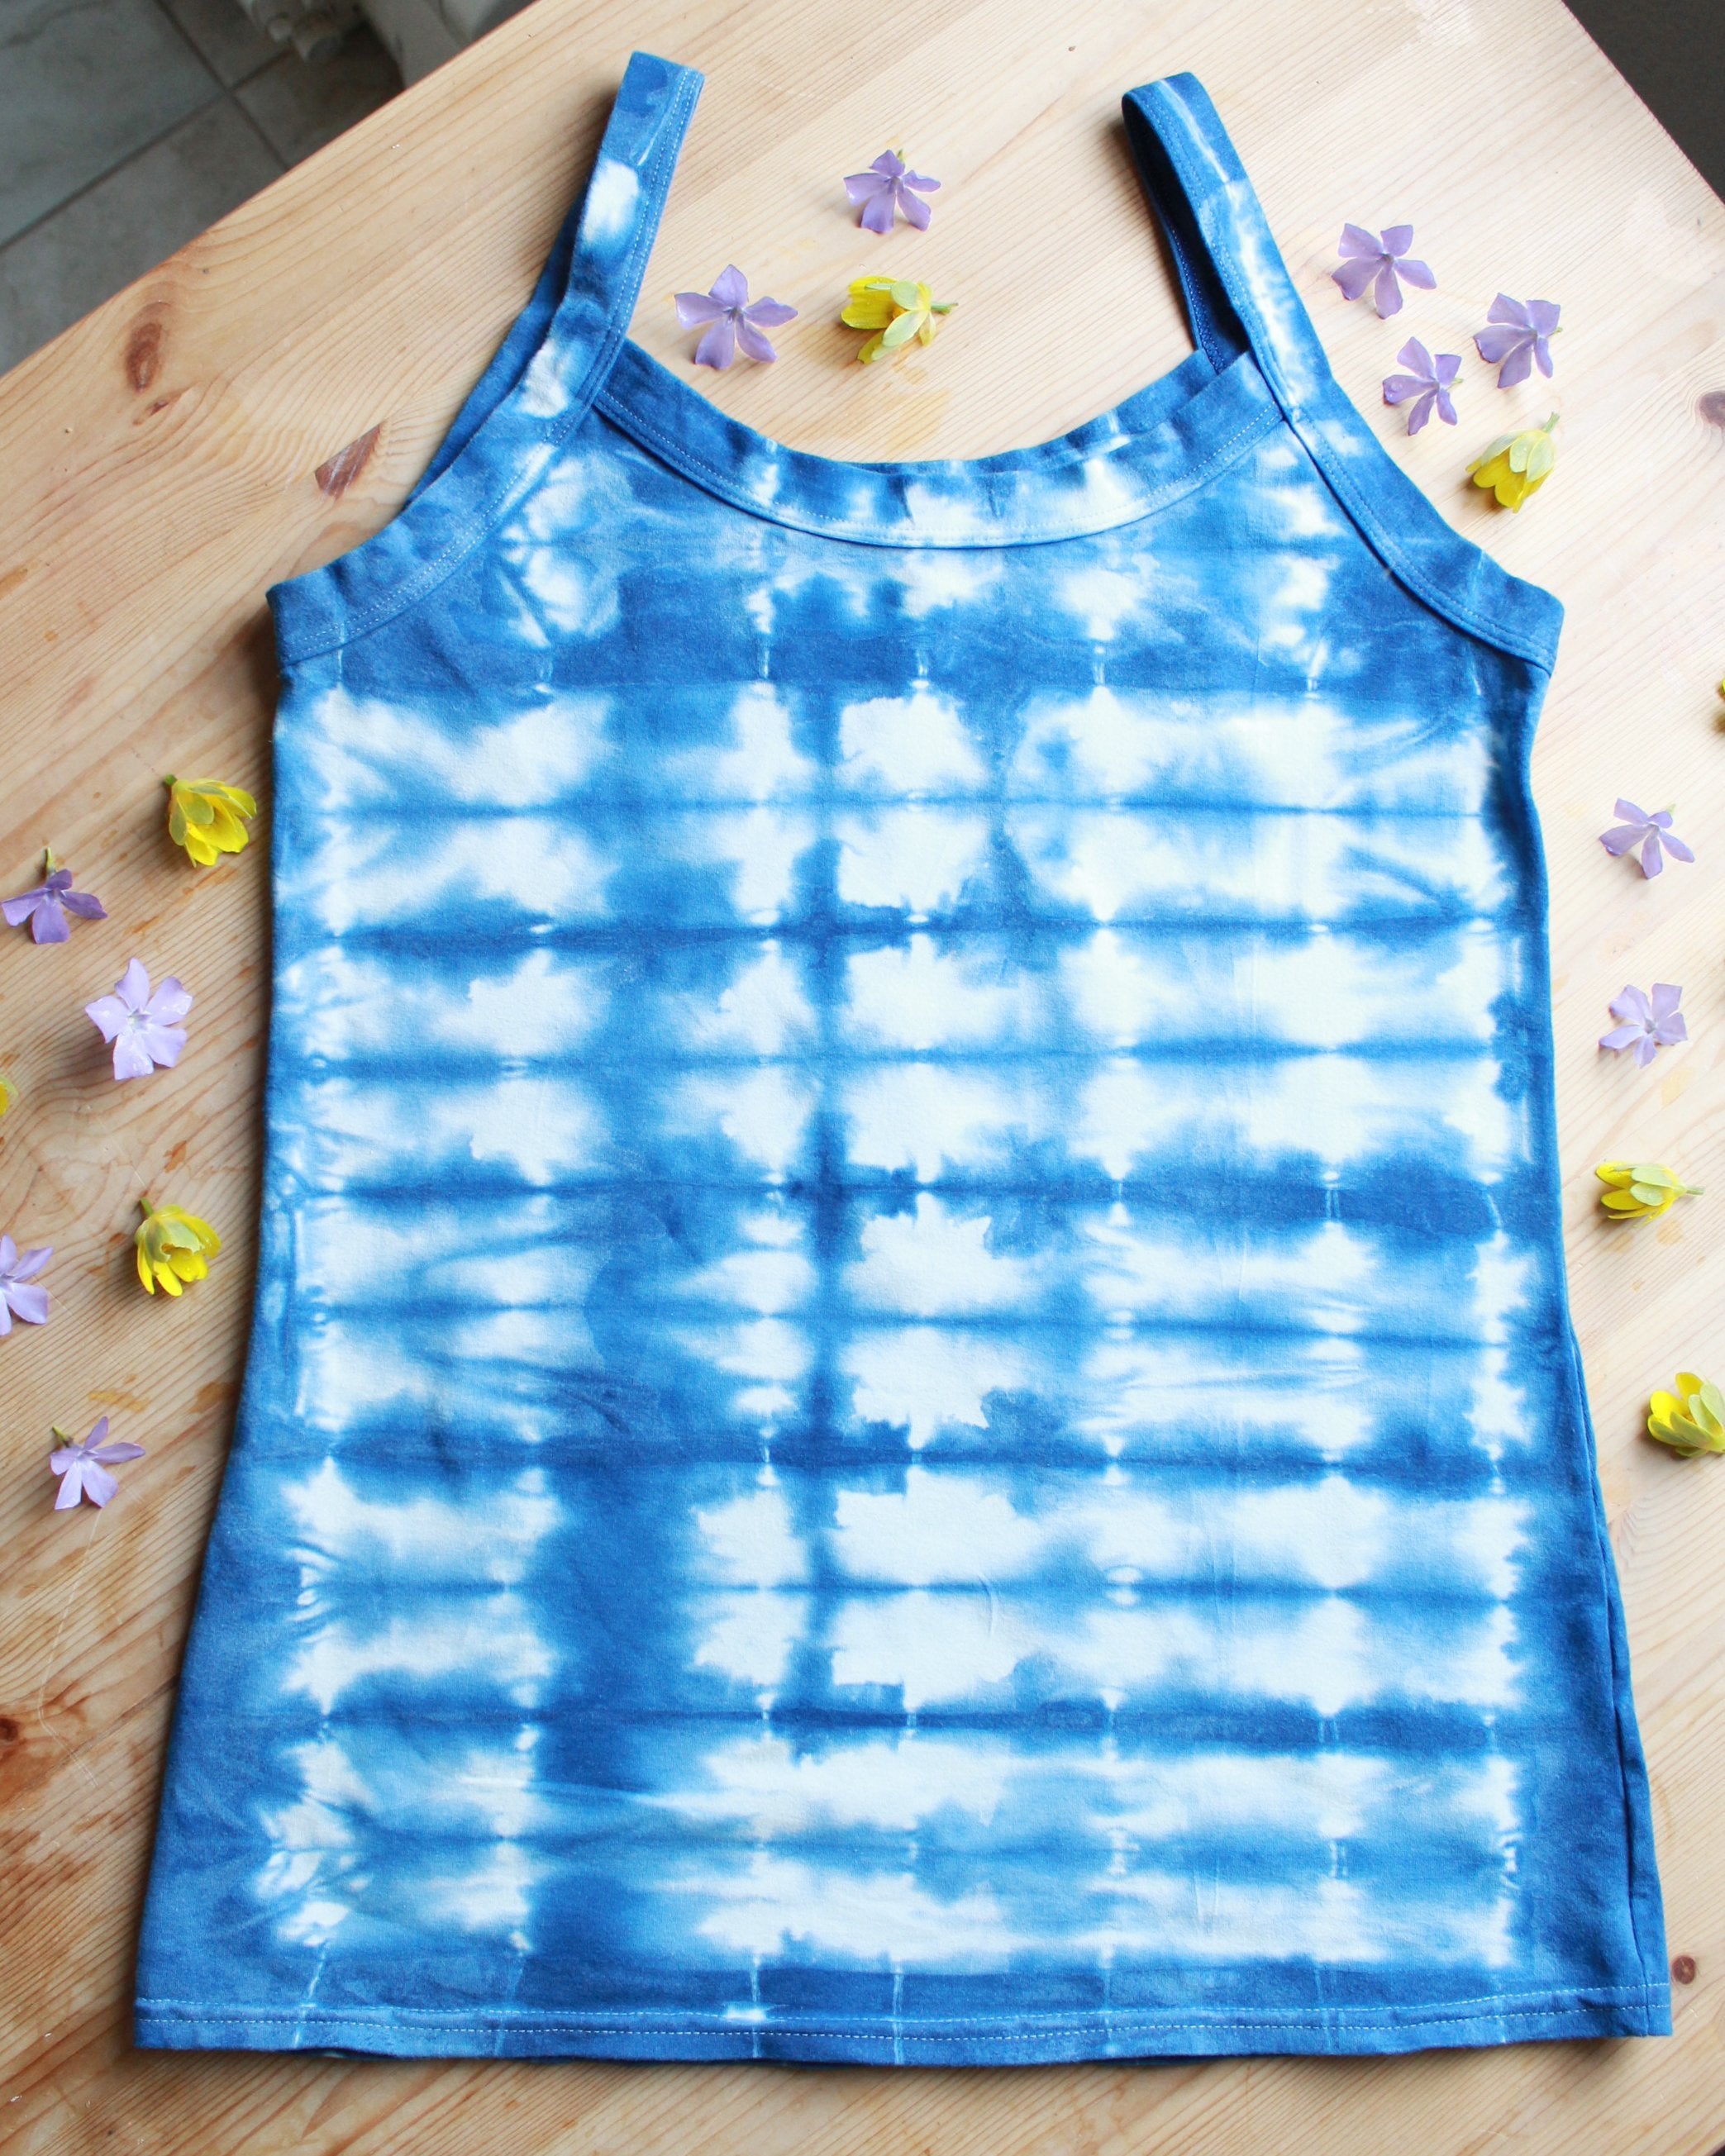 Flat lay of Thunderpants organic cotton Camisole in limited edition hand dyed indigo shibori tie dye.